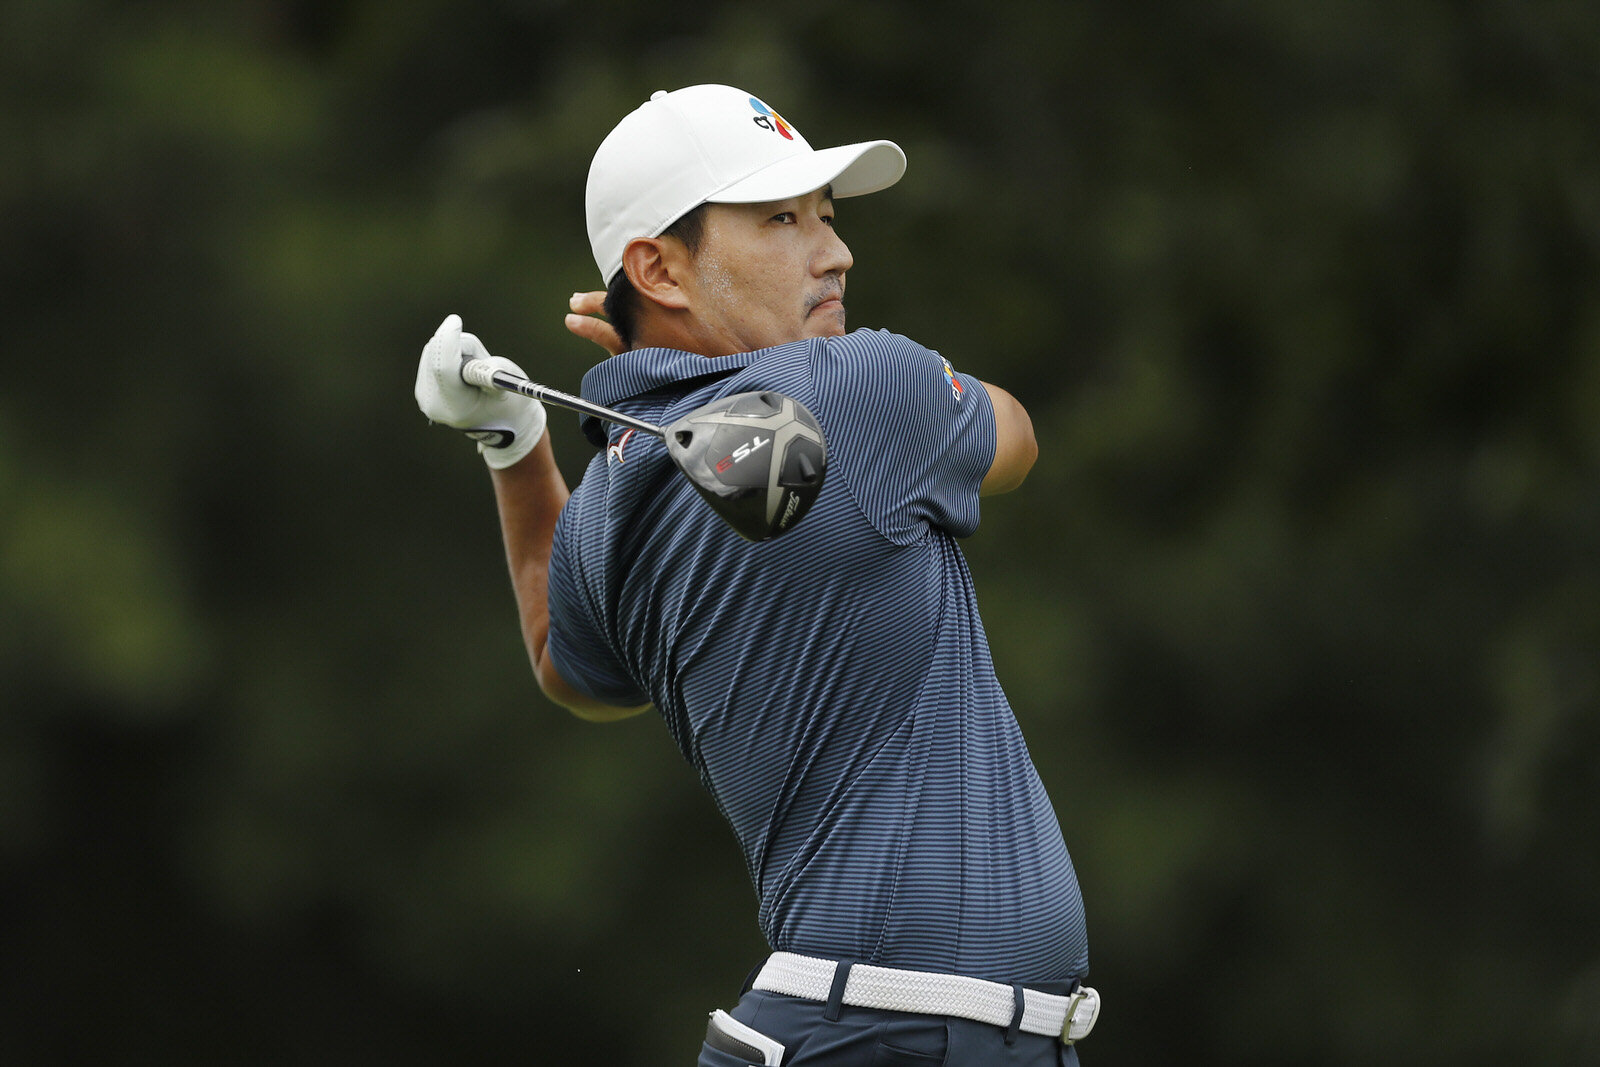  MEMPHIS, TENNESSEE - JULY 30: Sung Kang of Korea plays his shot from the 13th tee during the first round of the World Golf Championship-FedEx St Jude Invitational at TPC Southwind on July 30, 2020 in Memphis, Tennessee. (Photo by Michael Reaves/Gett